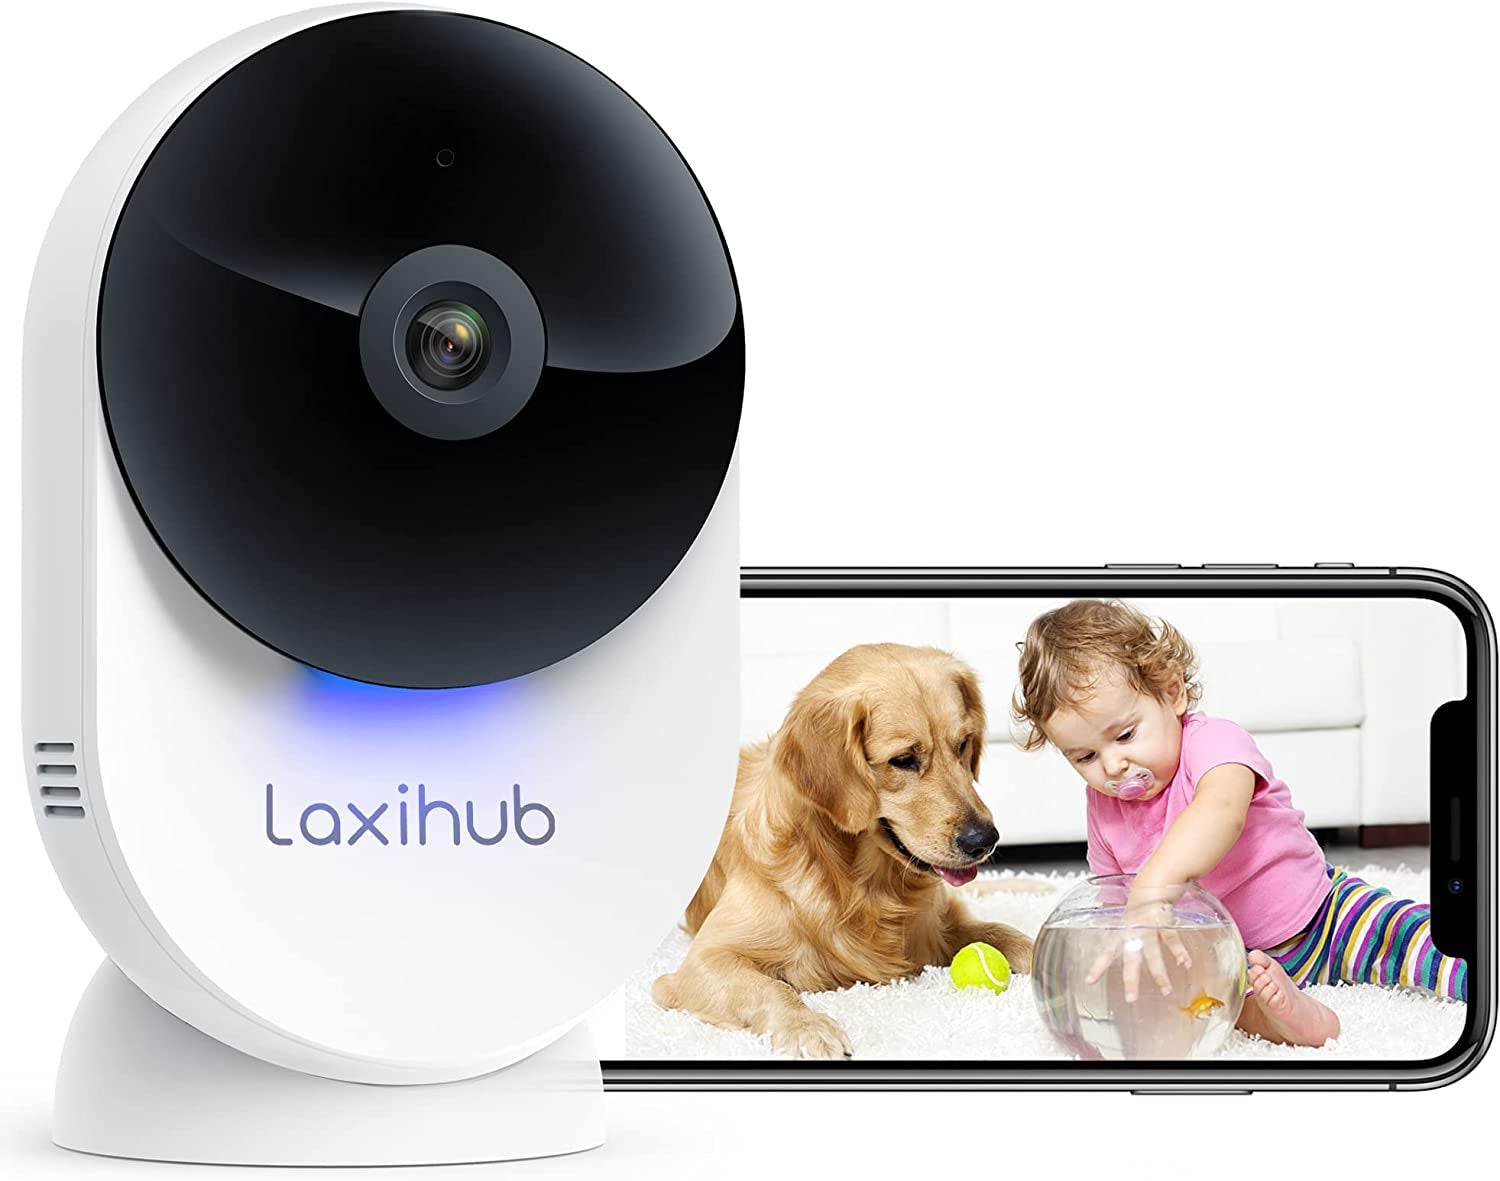 LAXIHUB, Laxihub 5G Indoor Home Security Camera, Minicam Baby Monitor with Camera and Audio, 1080P FHD, Night Vision, 2-Way Audio, AI Motion Detection Compatible with Alexa & Google Assistant